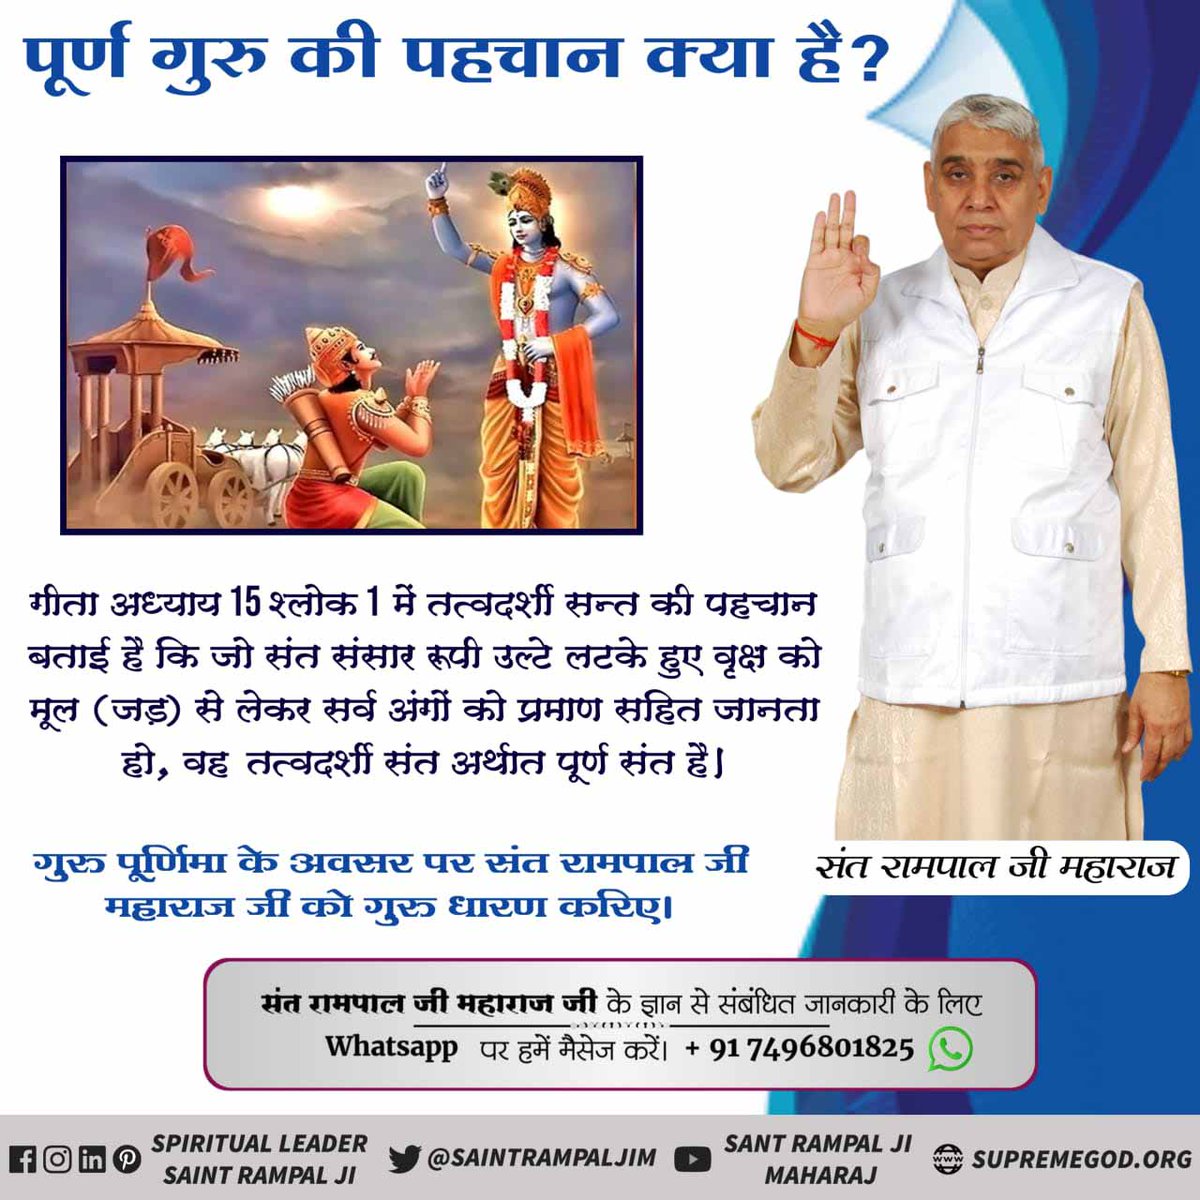 #GodMorningMonday Geeta chapter 15 verses 1-4 clearly mention that a true guru is able to explain all the parts of an inversely hanging world tree . For more information Visit Satlok Ashram Youtube Channel